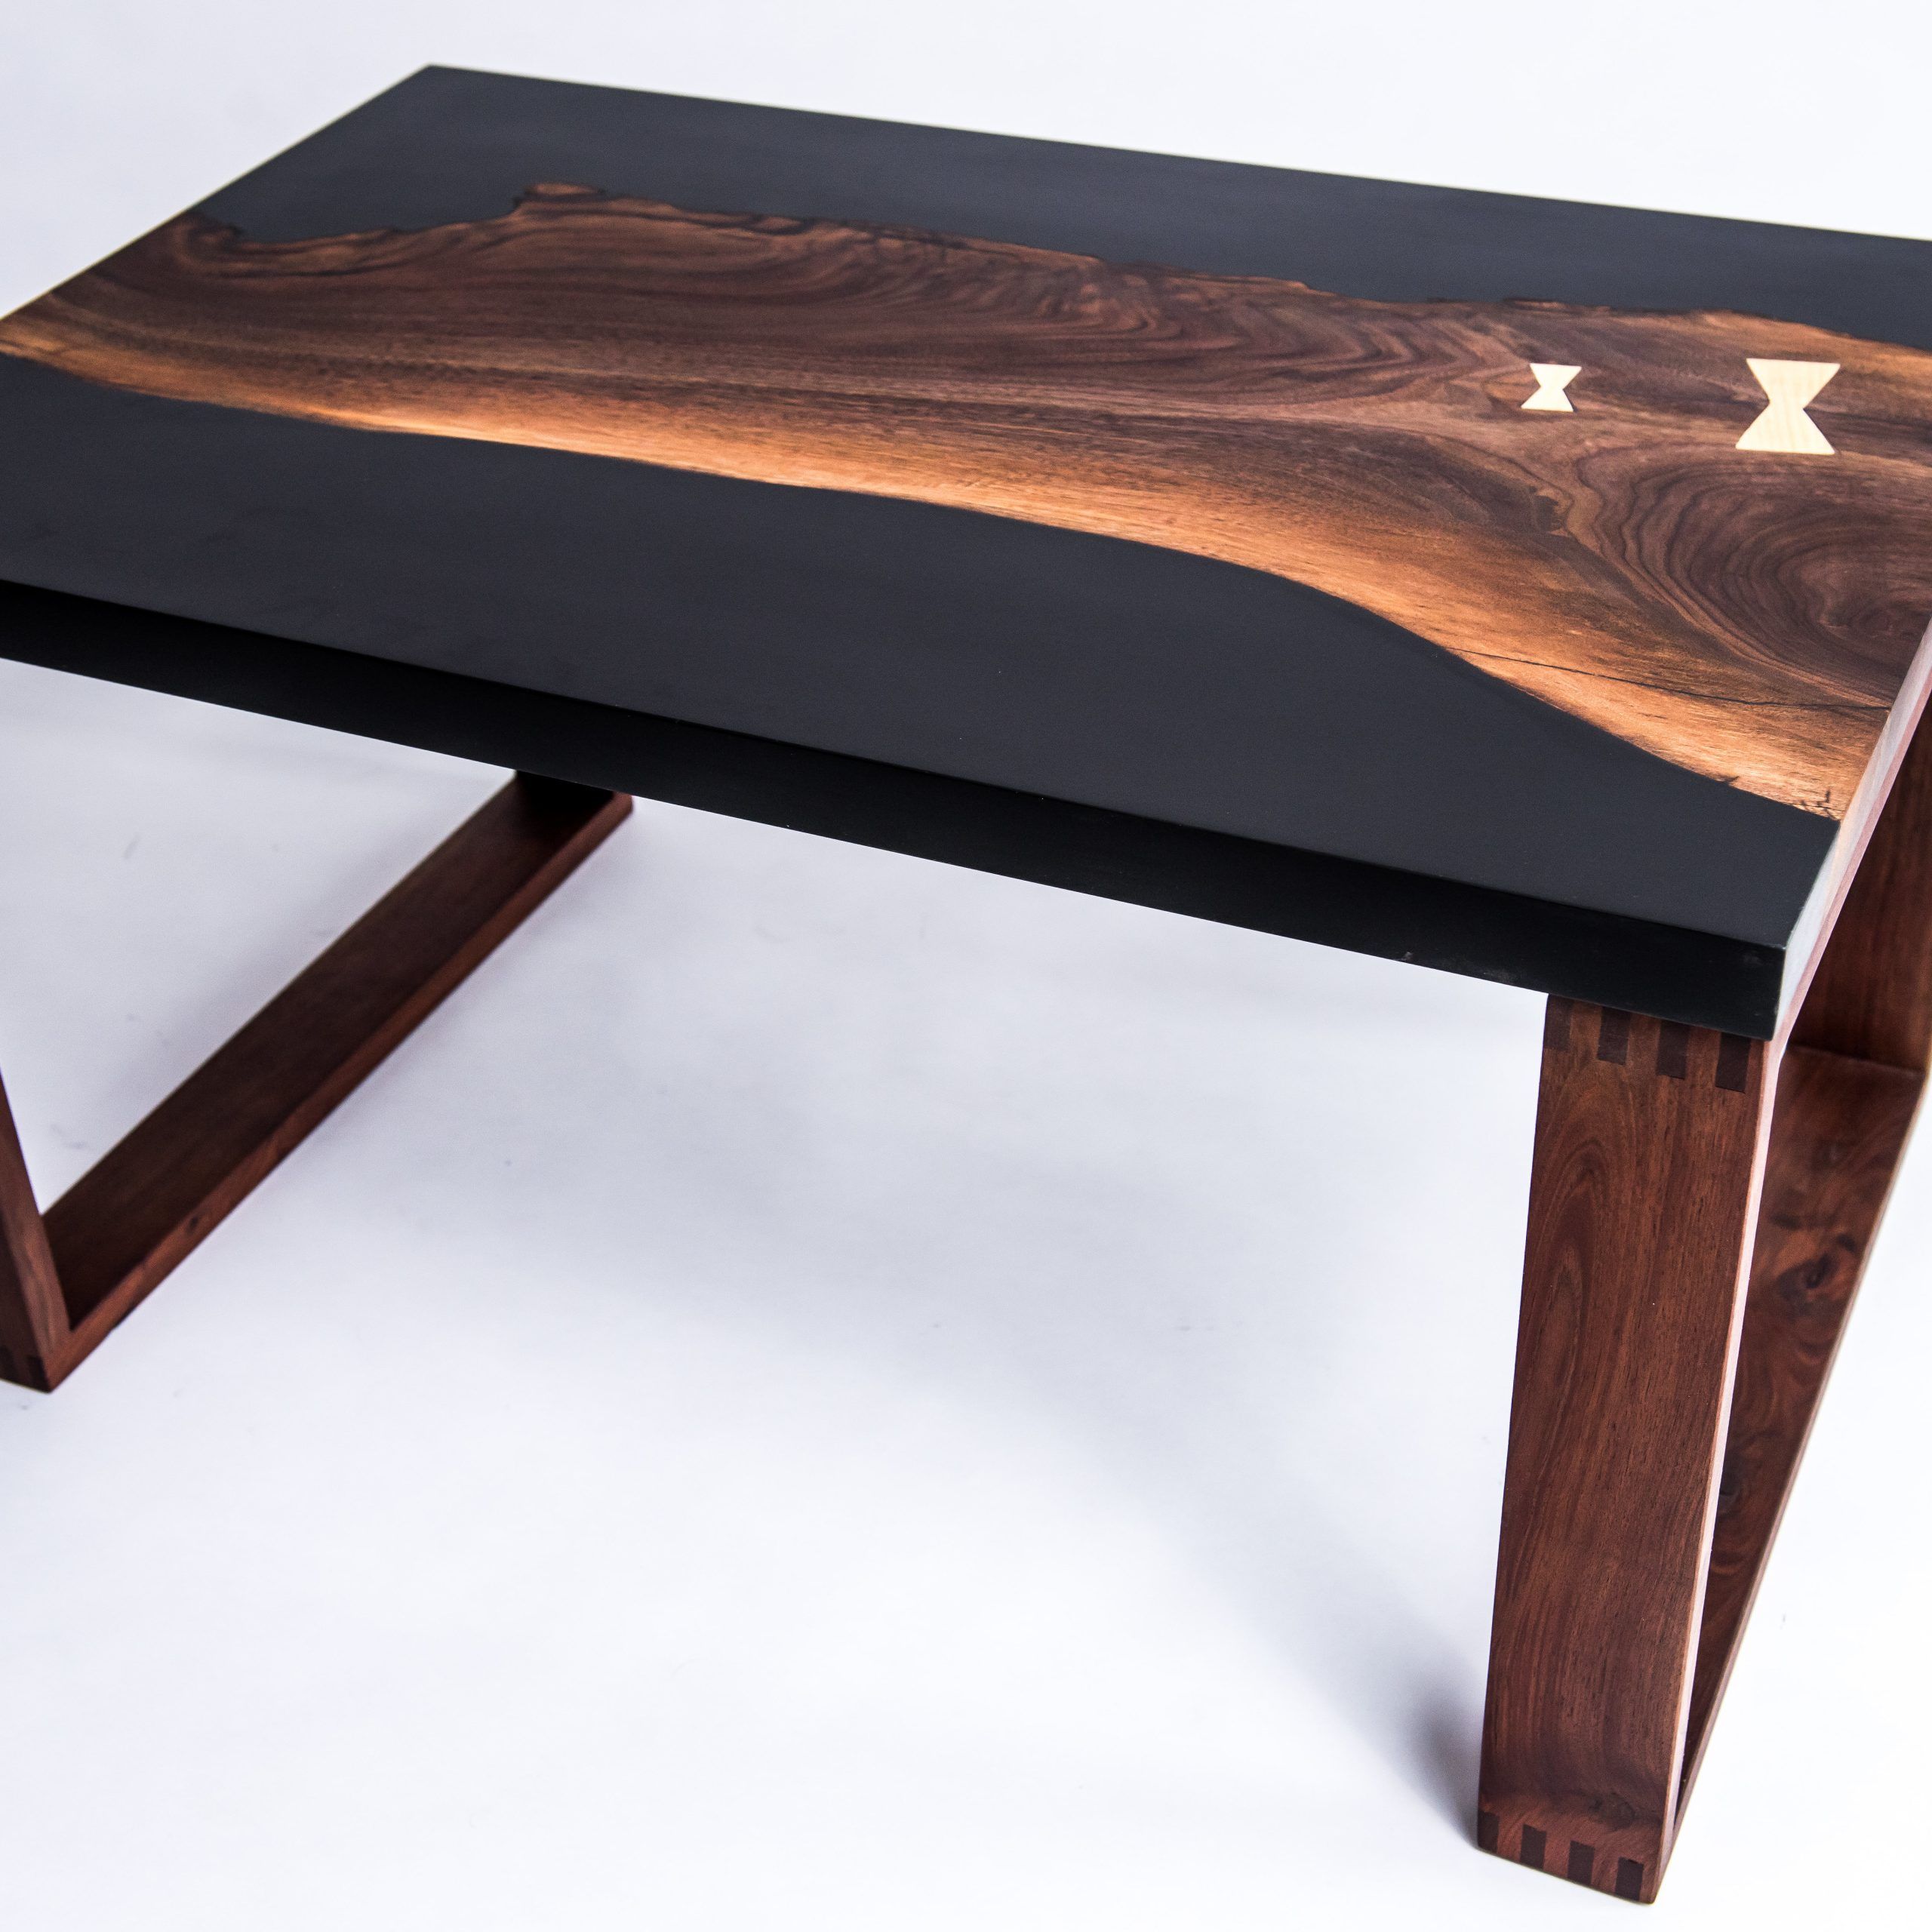 Black Walnut Resin Cast Coffee Table With Regard To Walnut Coffee Tables (View 9 of 15)